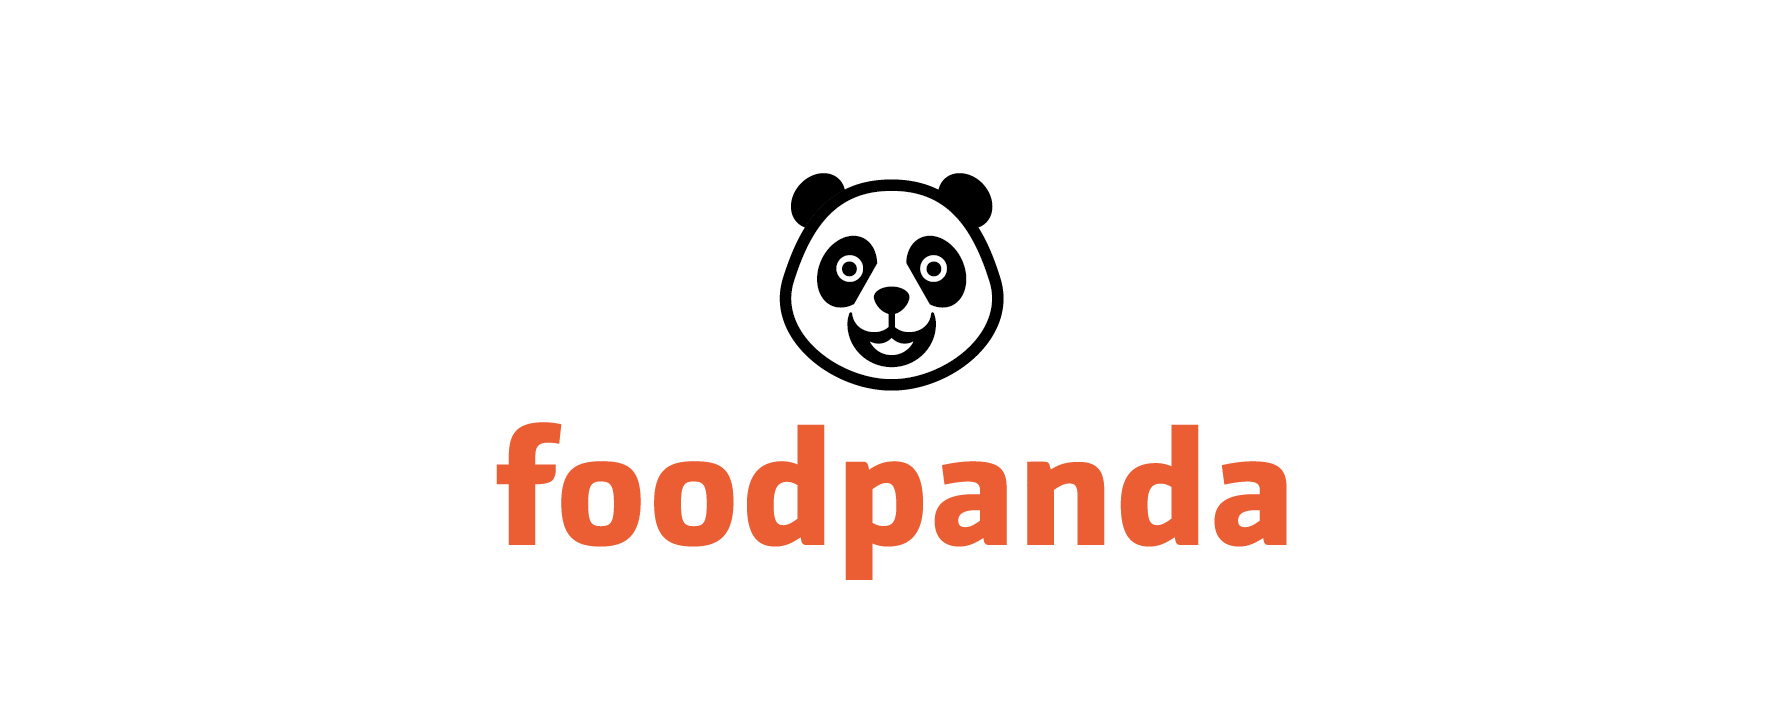 The number of Romanian restaurants listed on foodpanda.ro doubles in one year